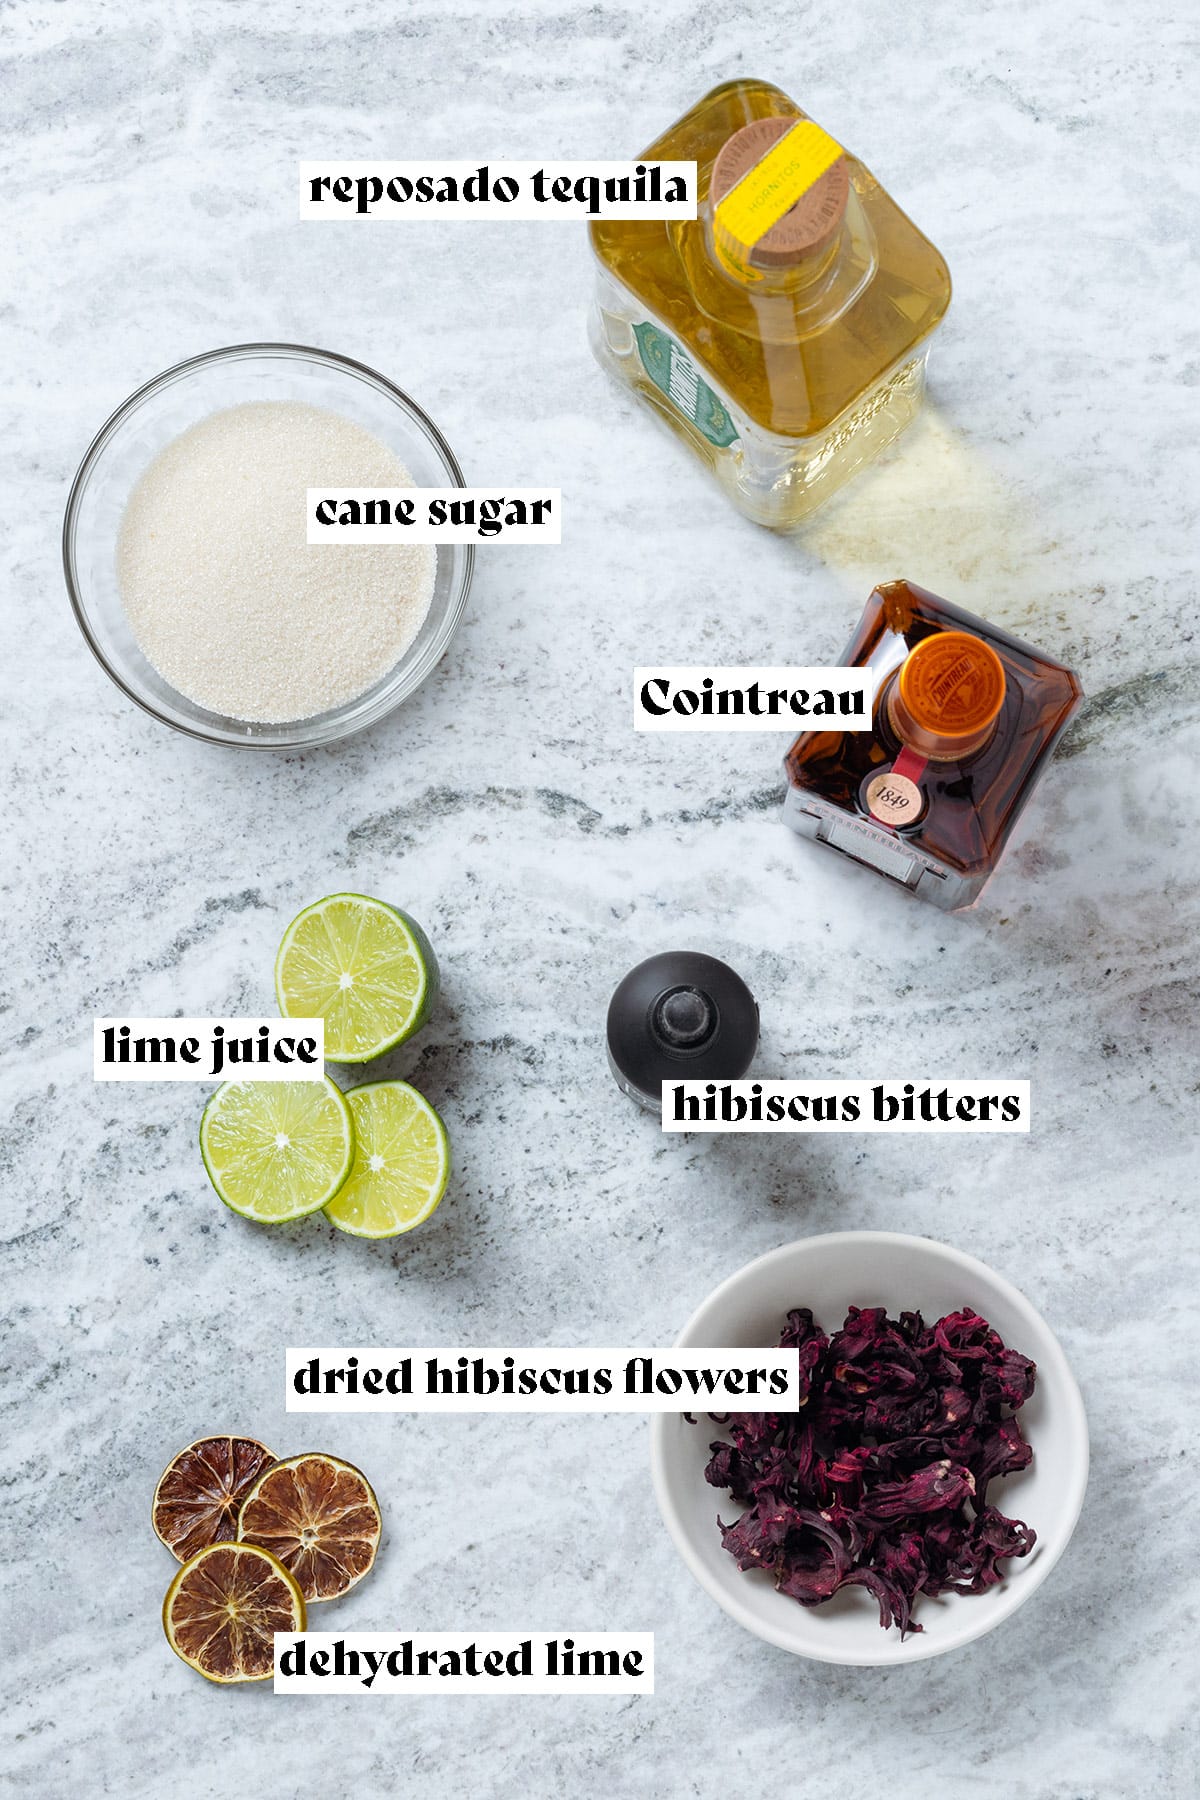 Ingredients for a hibiscus margarita laid out on a grey stone background.